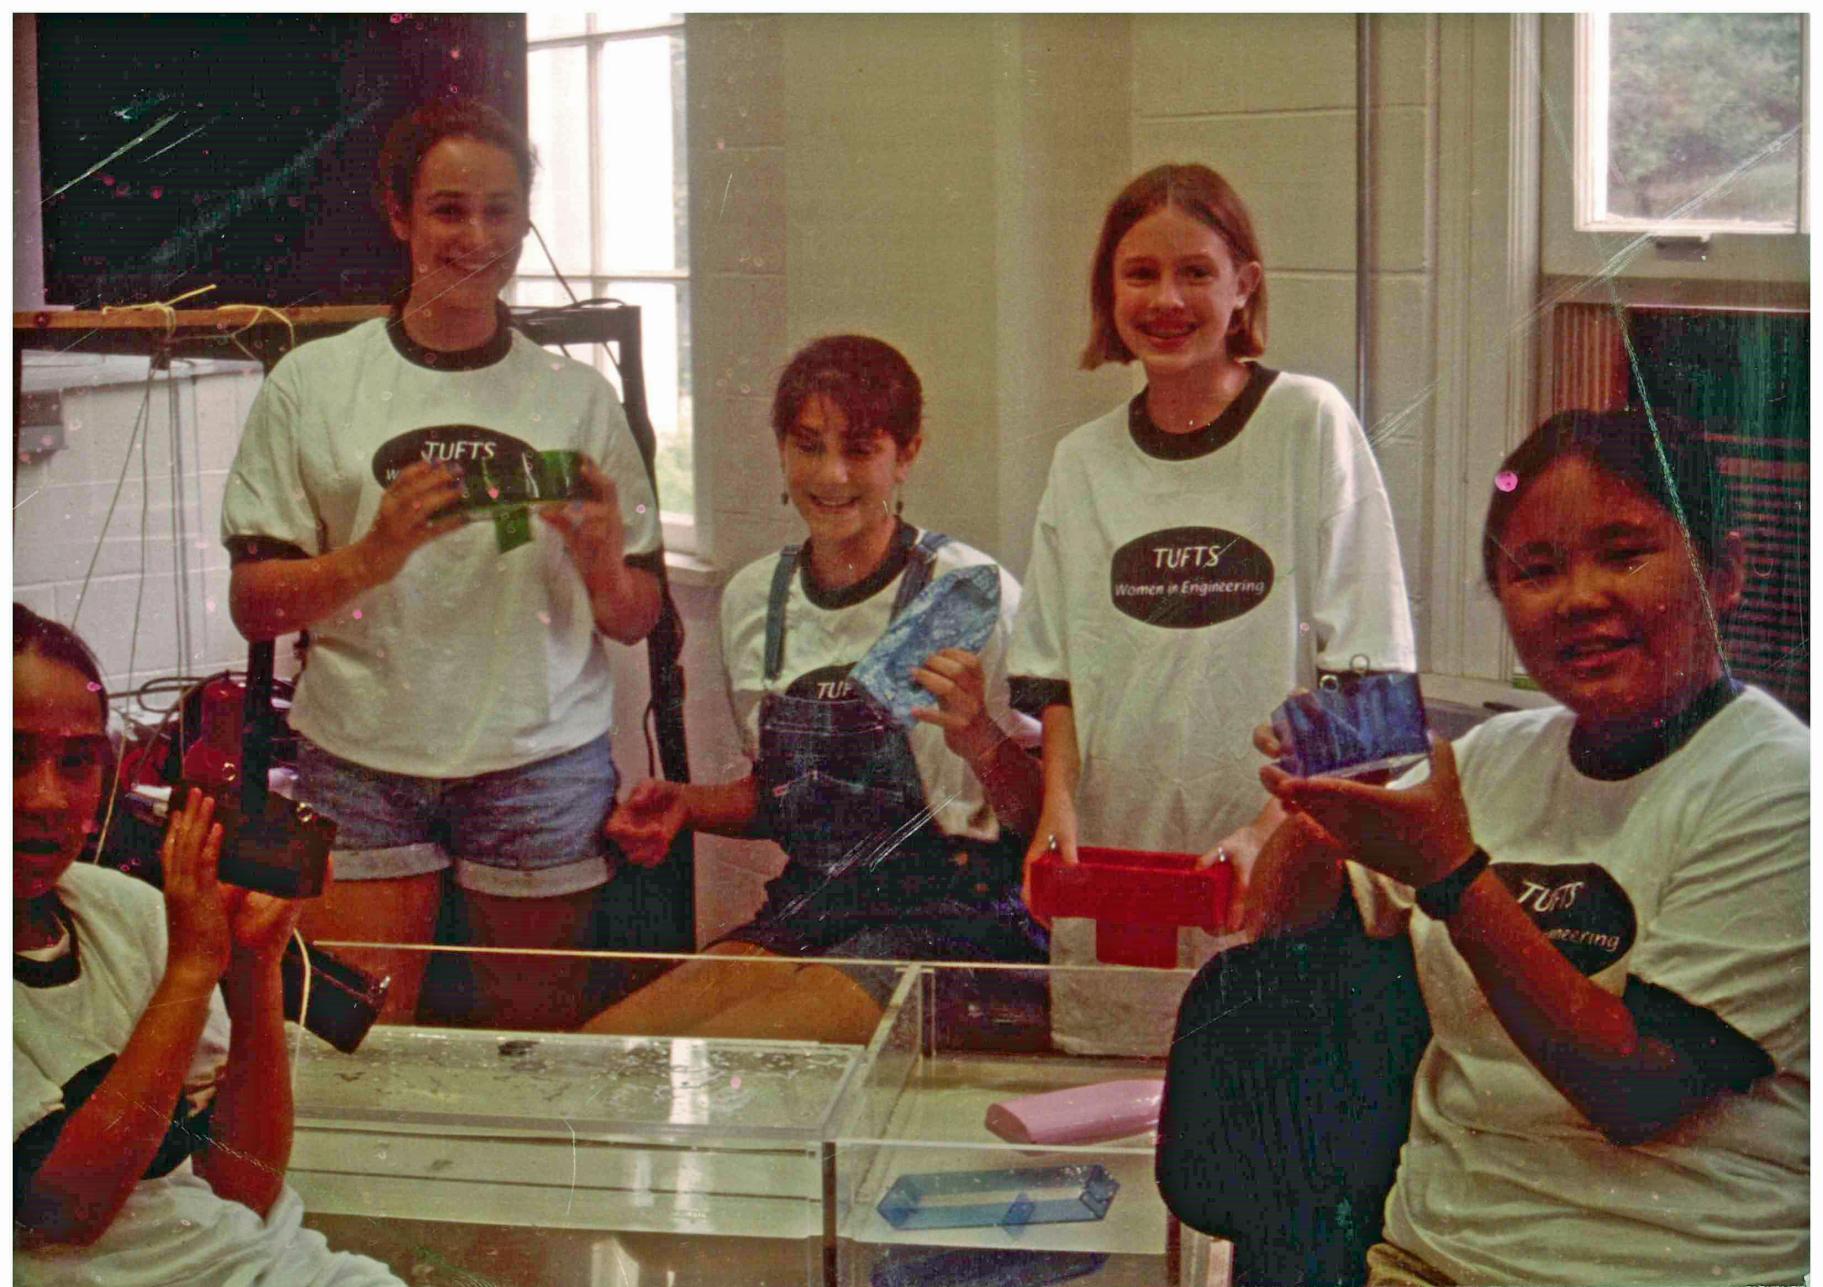 5 teenage girls in matching tshirts display a science exhibit they created; circa 1990